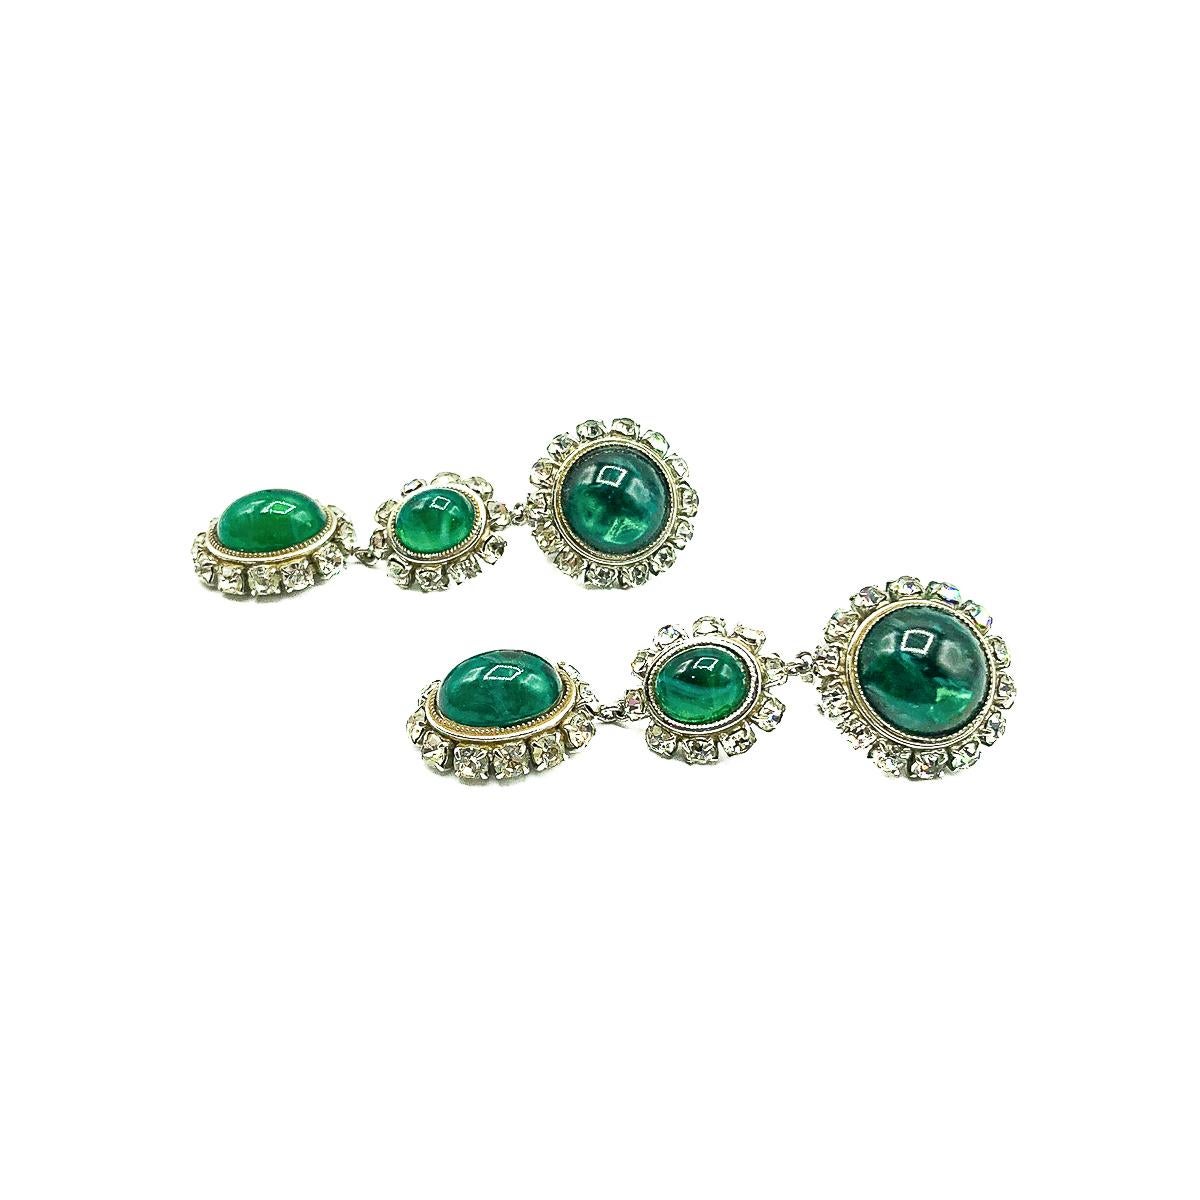 A mesmerisingly beautiful pair of Vintage Dior Emerald Drop Earrings dating to 1966. Featuring wonderful emerald green glass cabochons created to emulate natural emeralds with their inclusions. Set in a silvertone metal. All stones claw or gallery